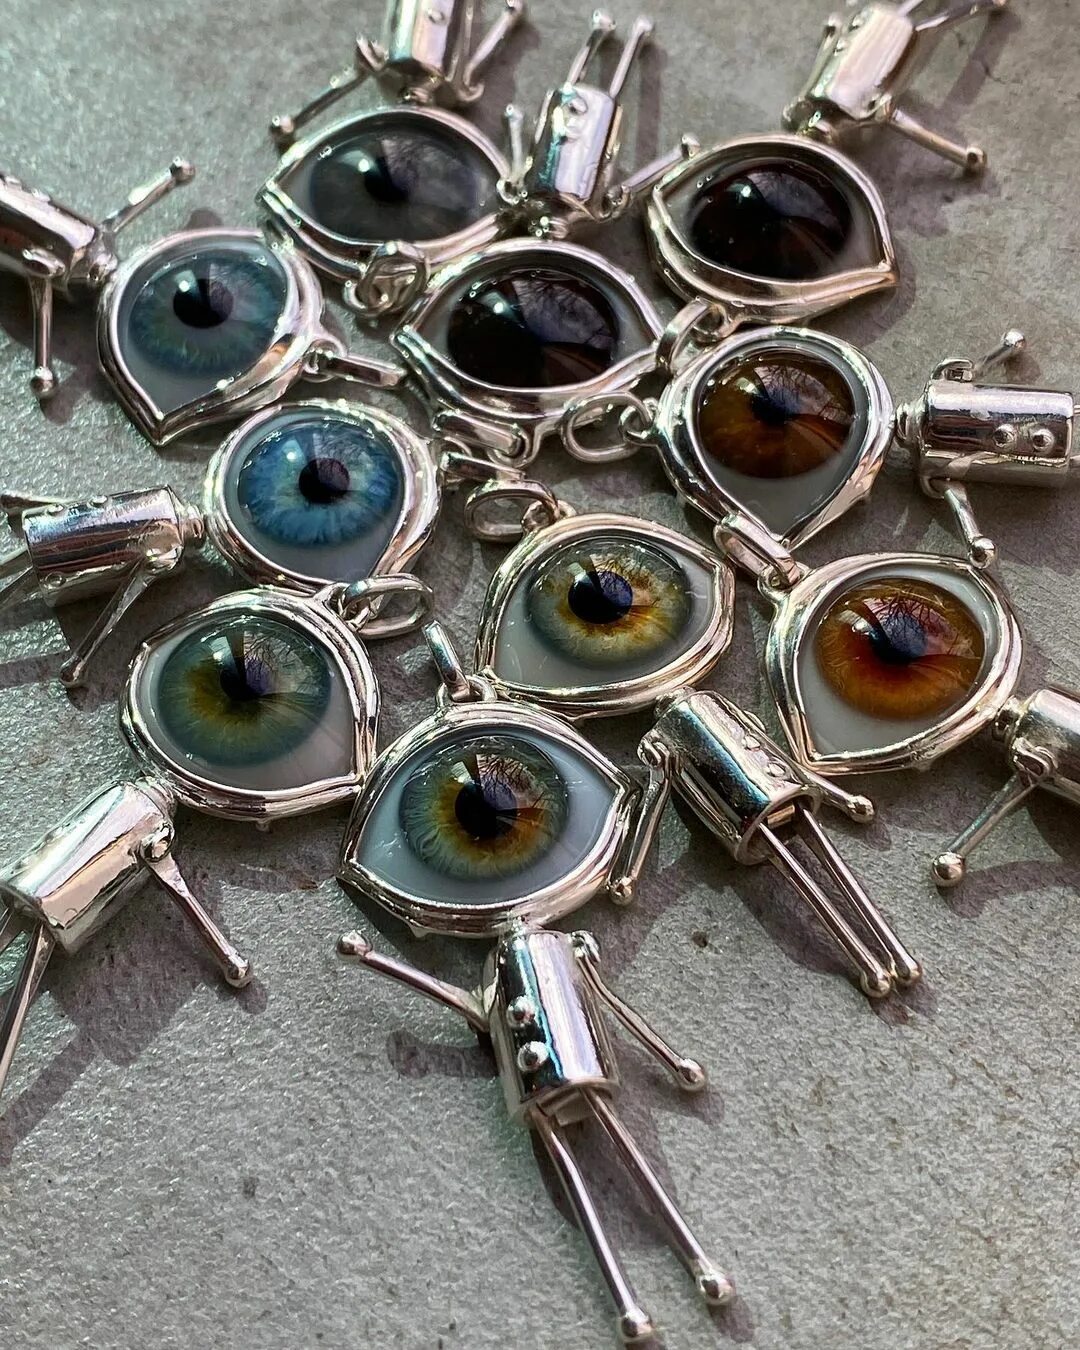 Prosthetic eyes in jewelry on Instagram: "These limited edition friend...